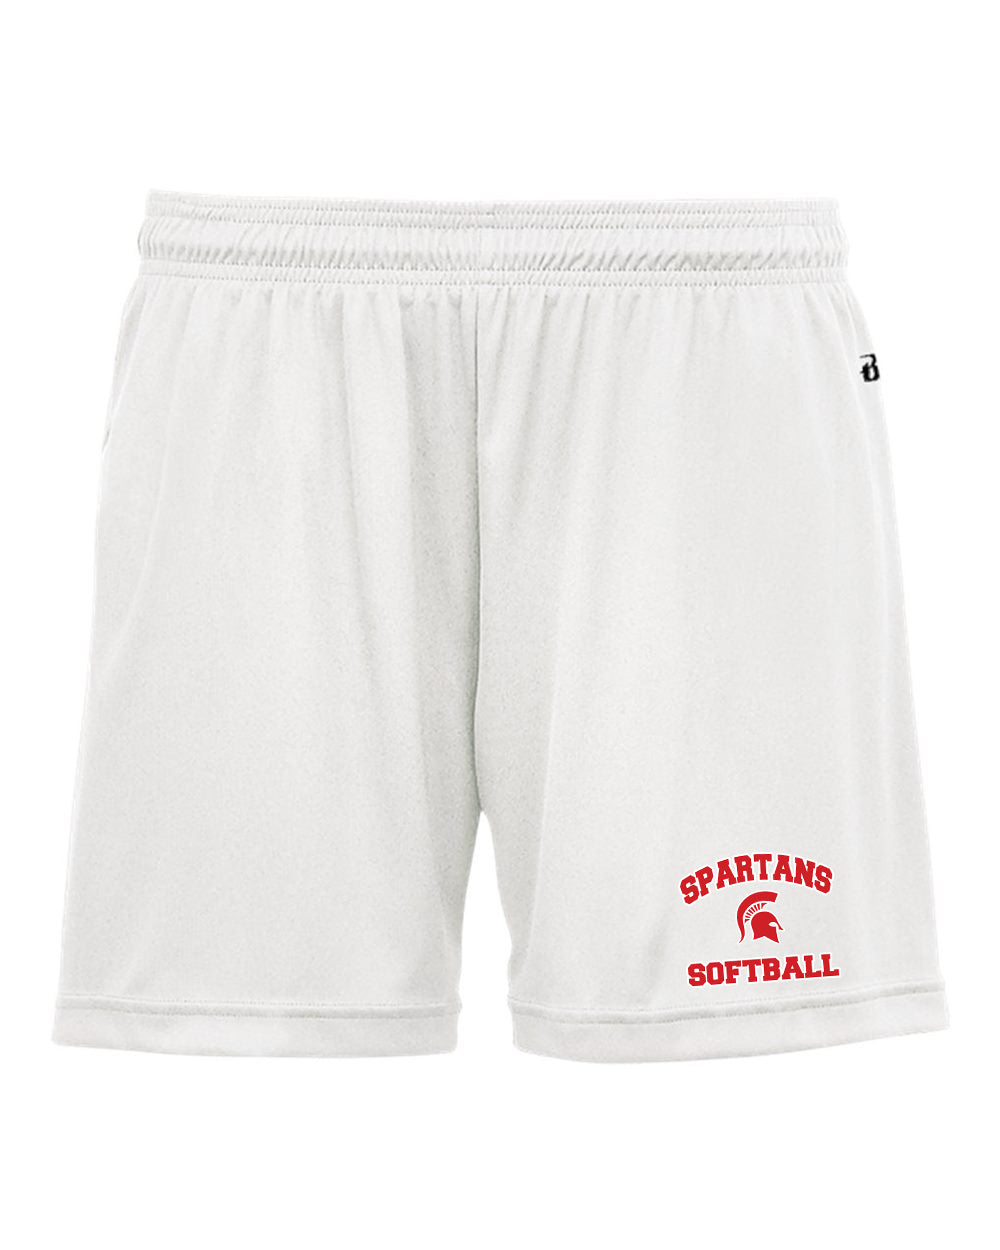 ELGS Ladies Badger B-core Shorts - 4116 (color options available)